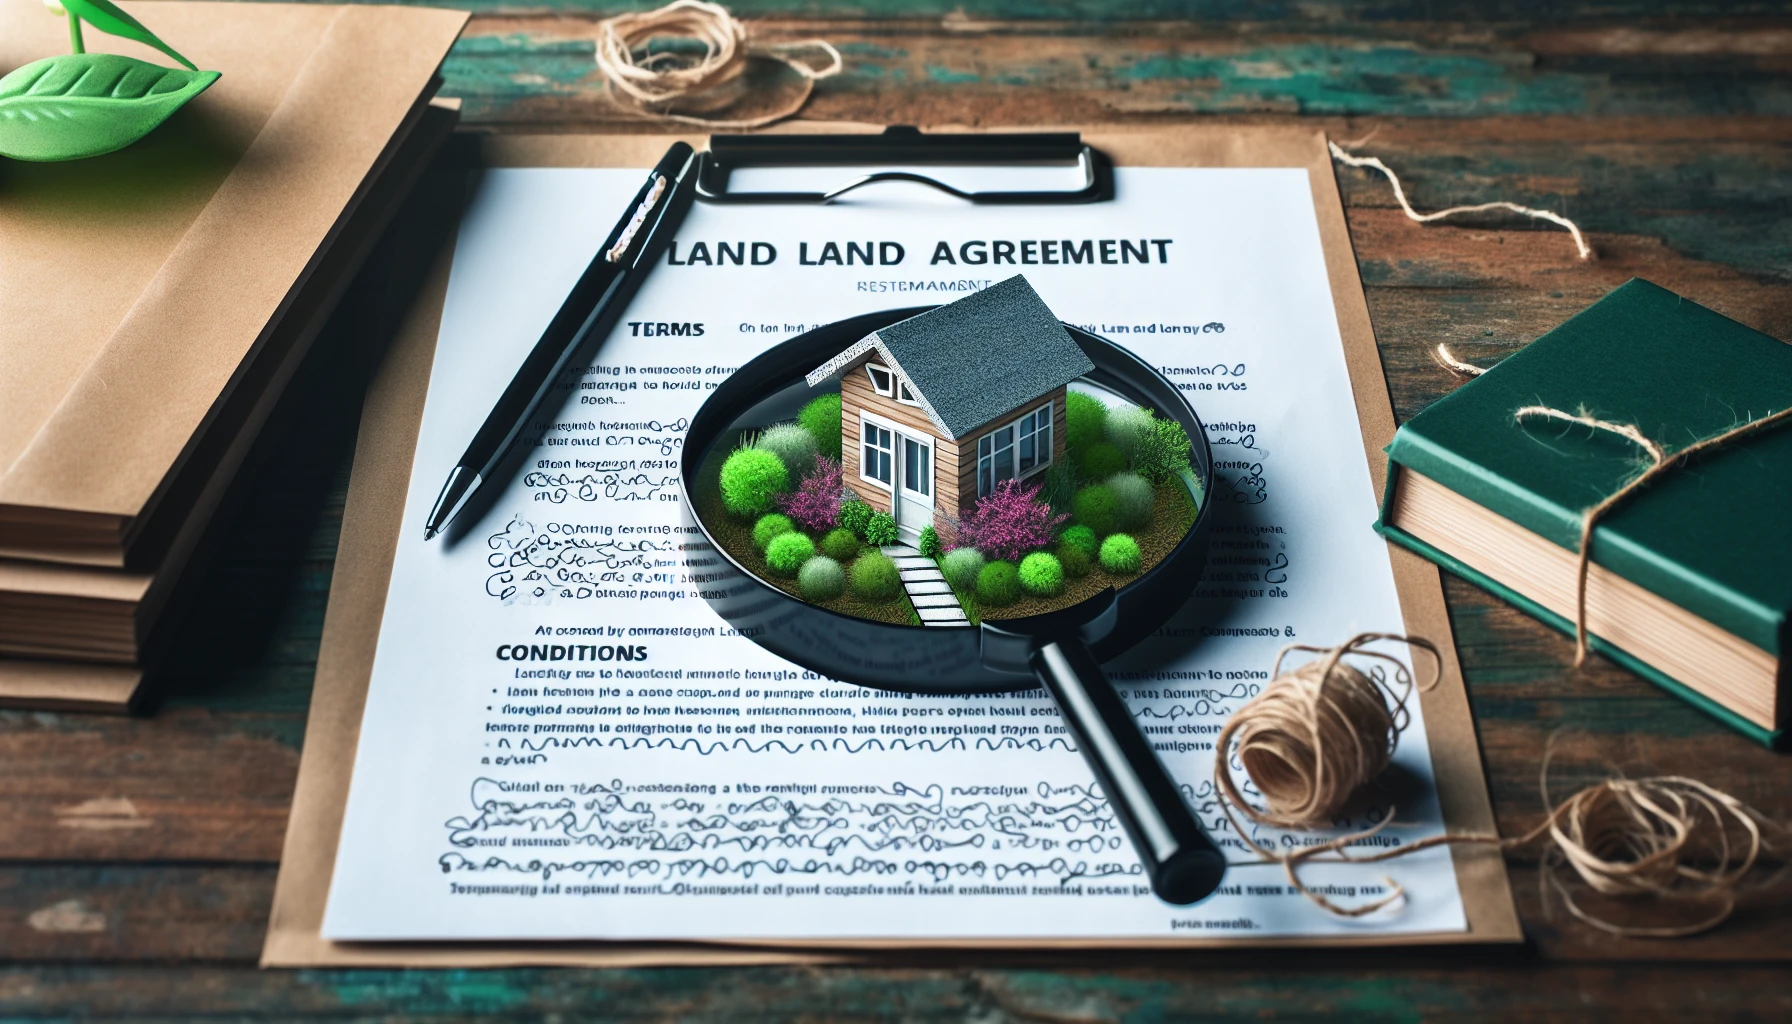 Illustration of a rental agreement document with 'Tiny House Land Rental' prominently displayed